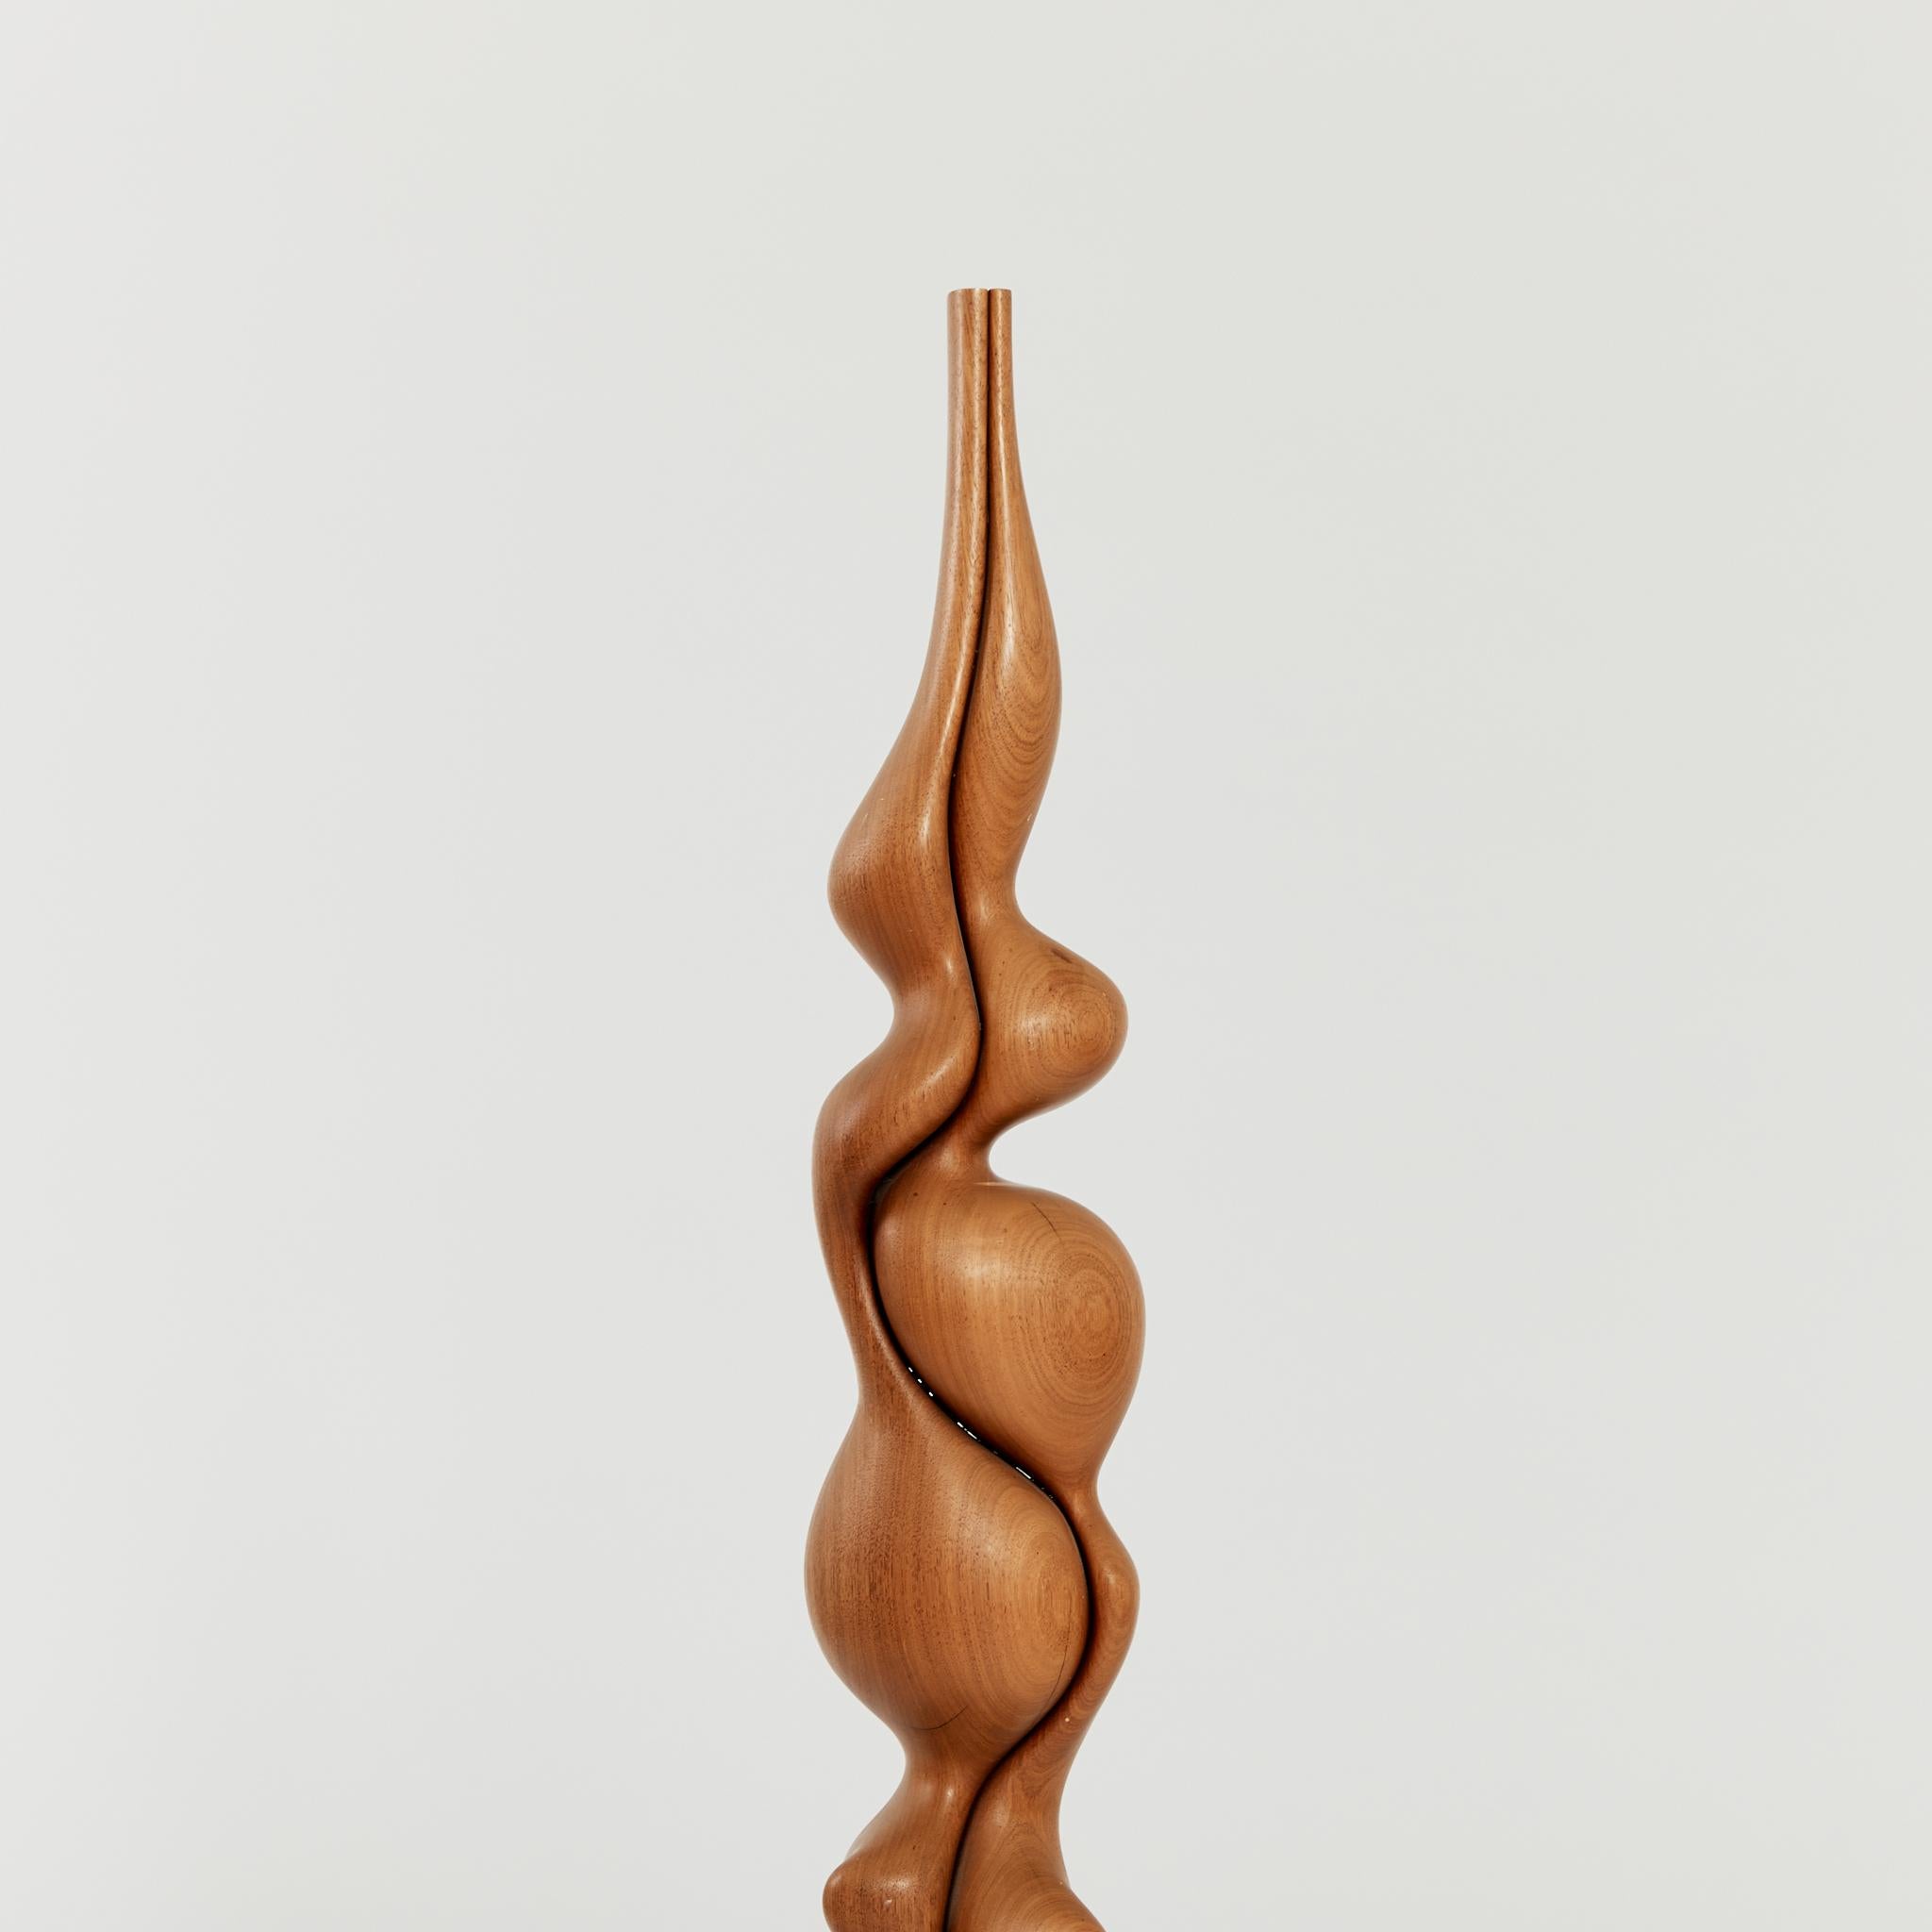 Tall Biomorphic Wood Floor Sculpture with Concrete Plinth 1